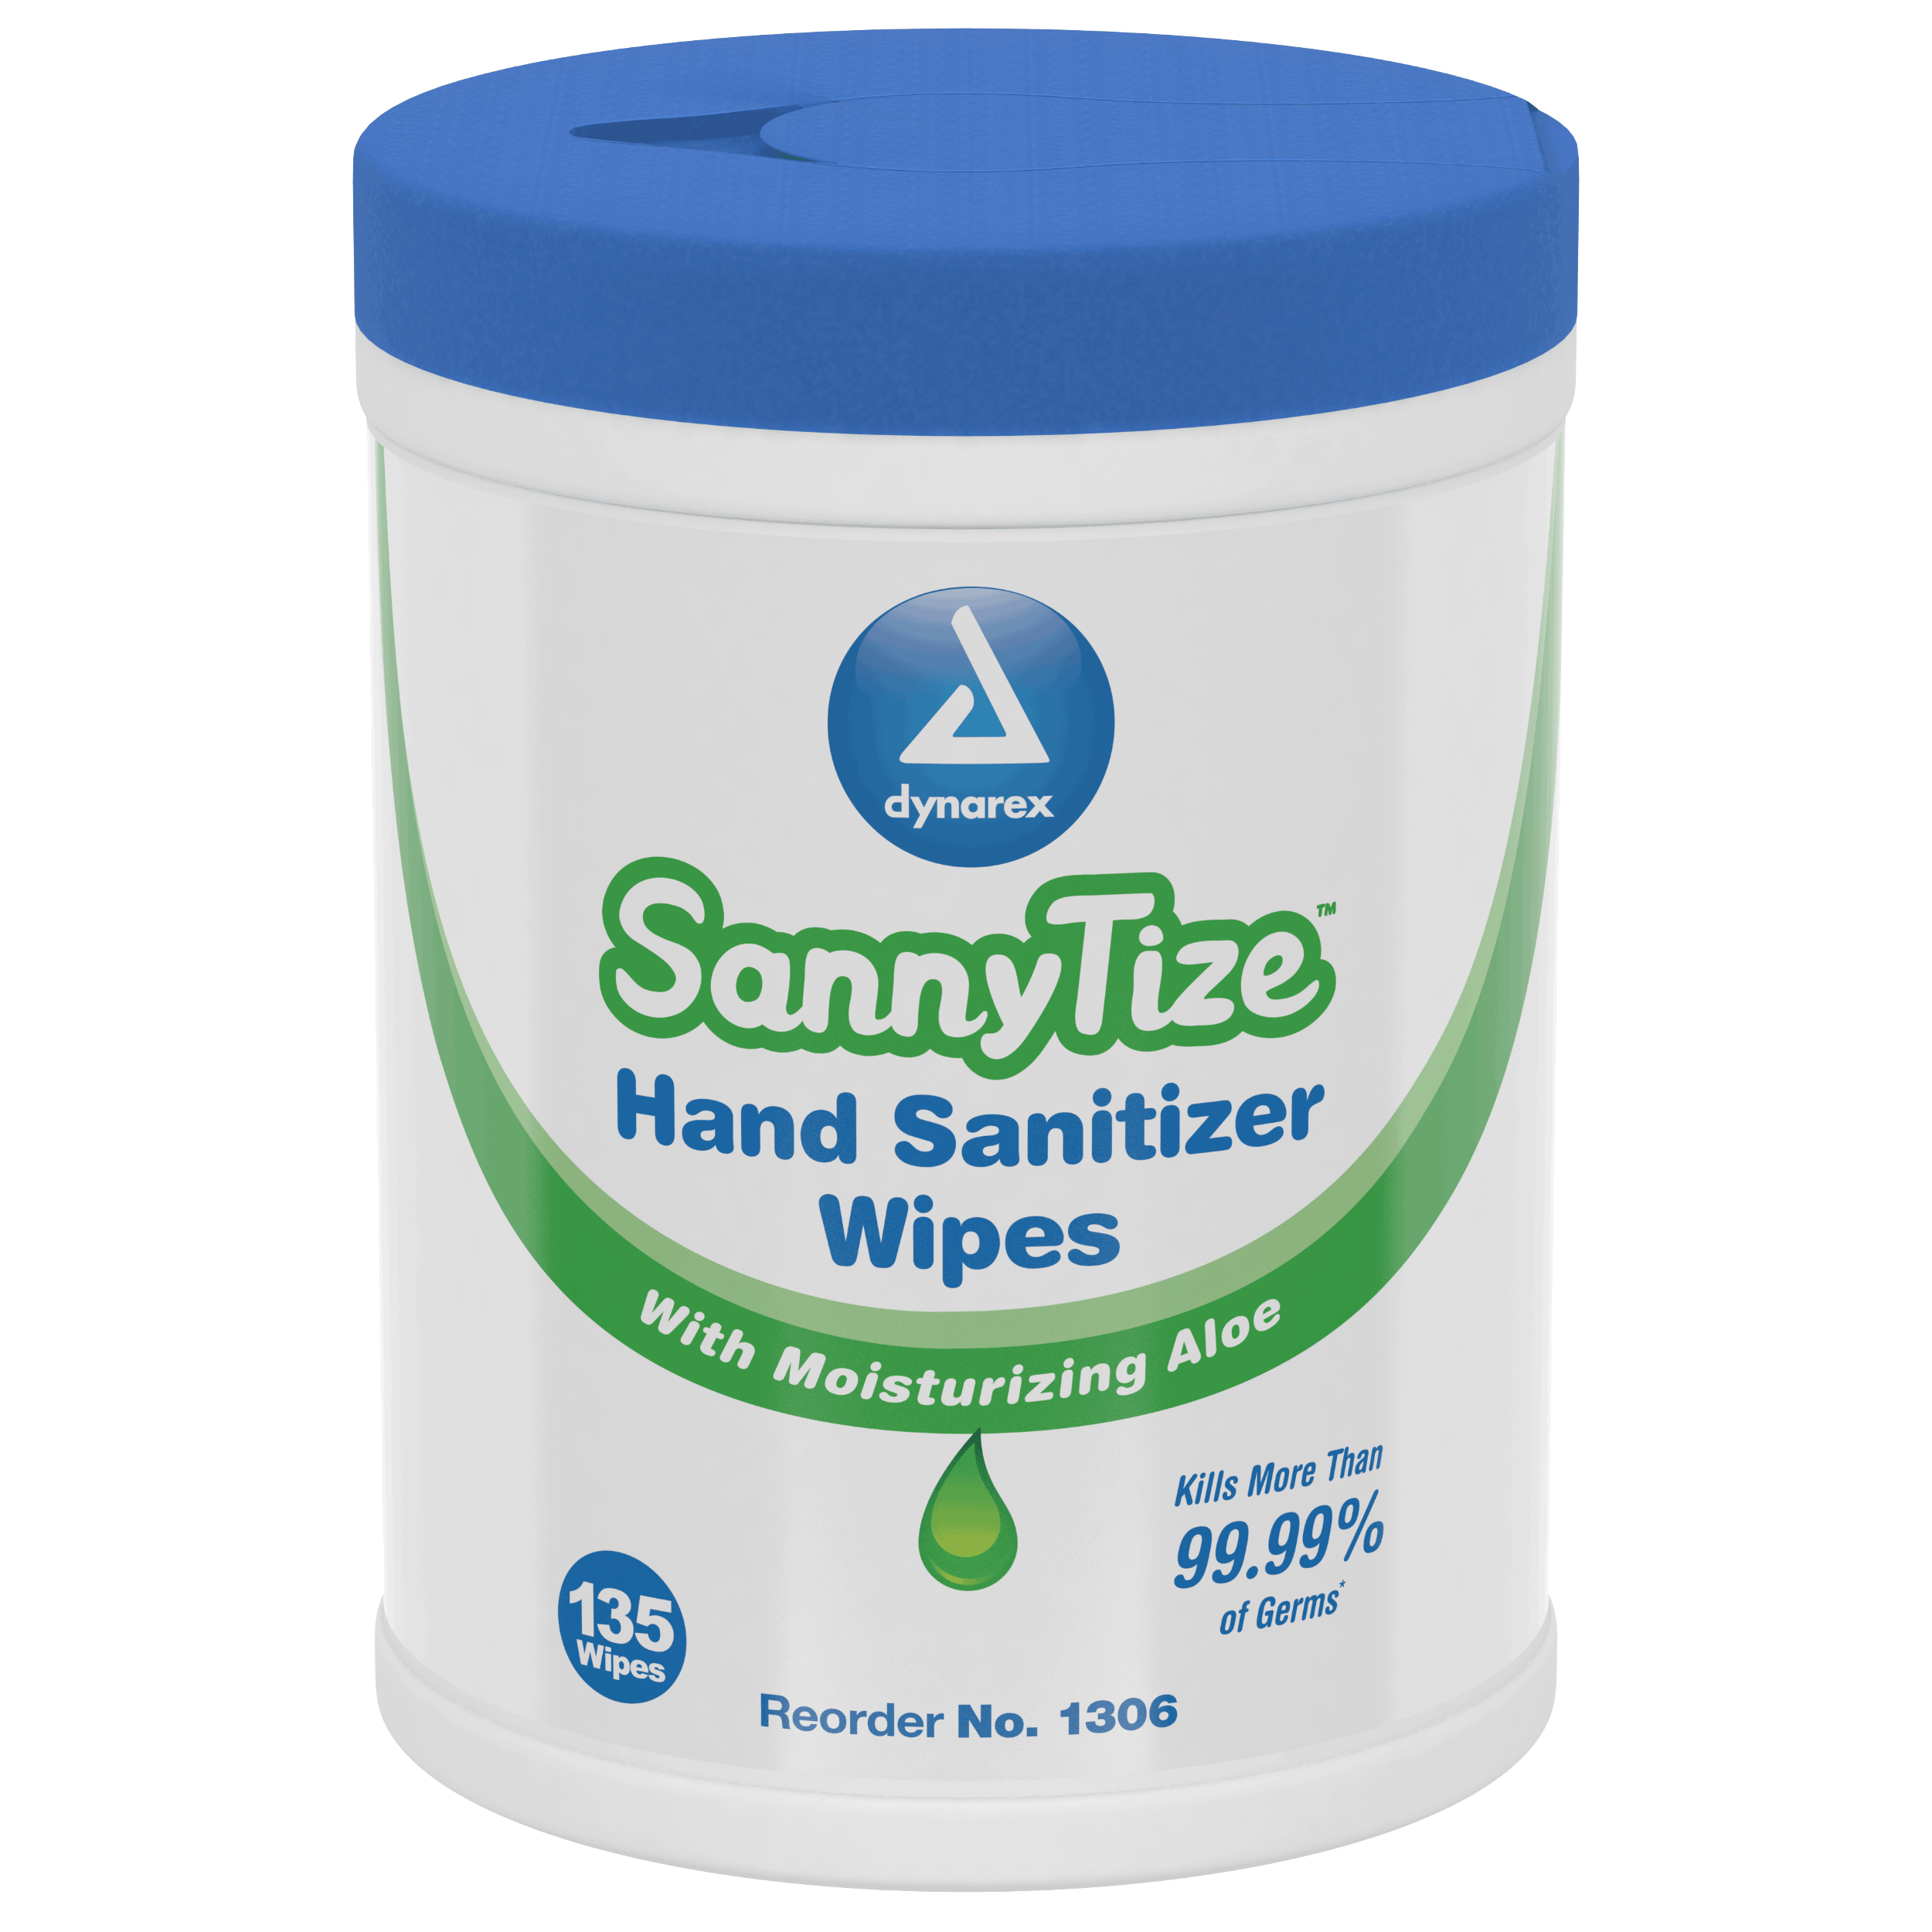 SannyTize Hand Sanitizer Wipes - 135 wipes/canister